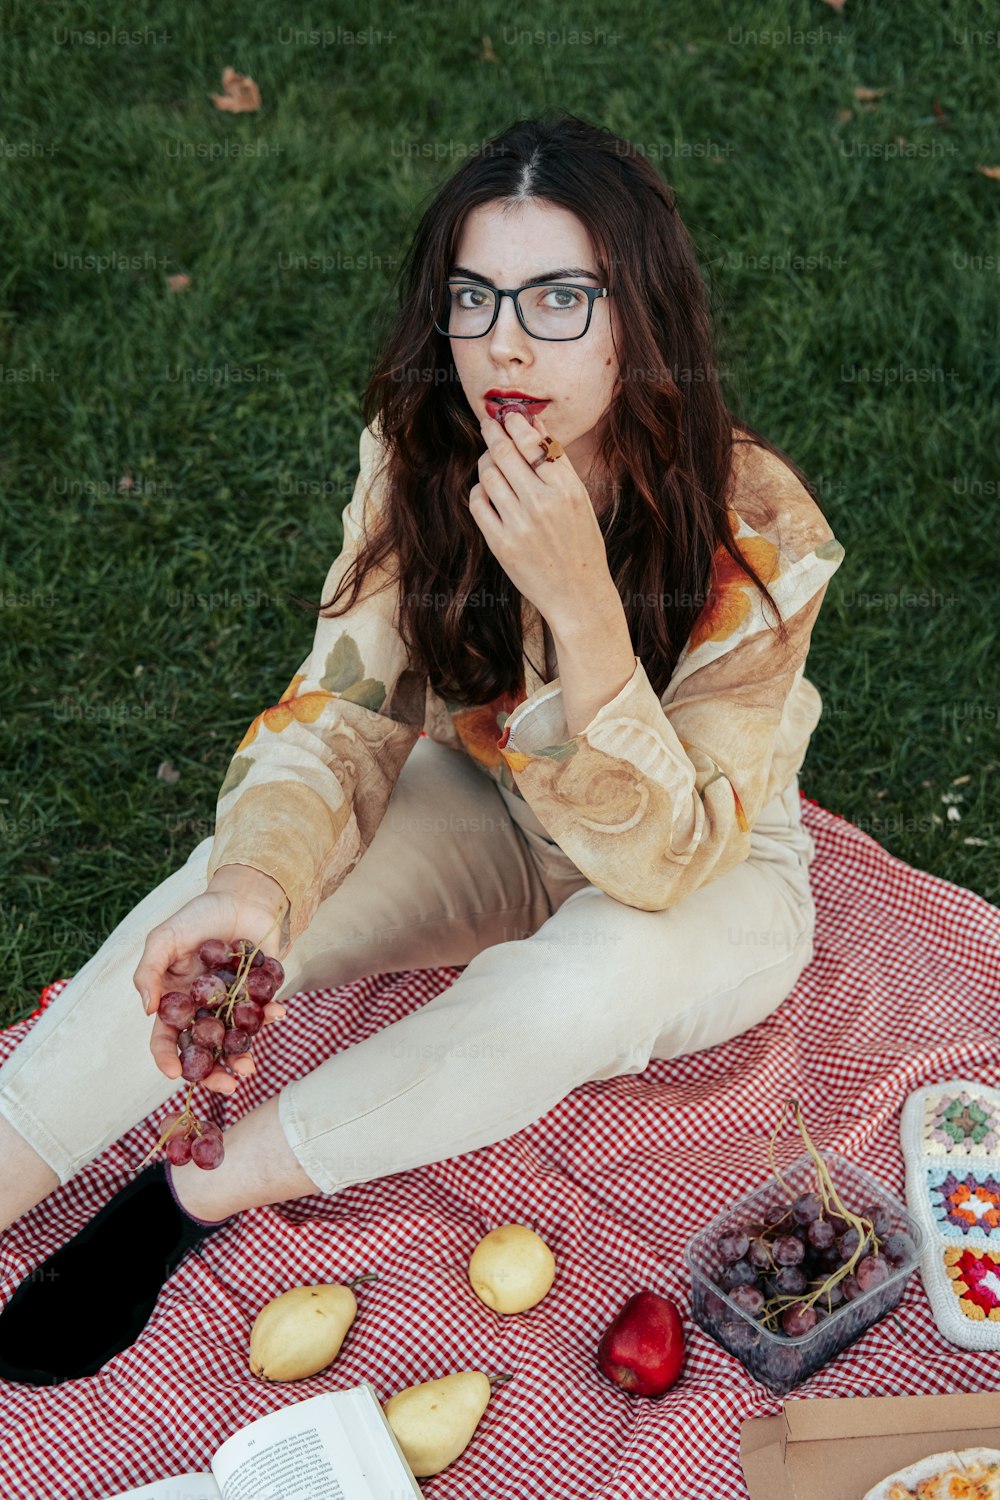 a woman sitting on a blanket eating grapes